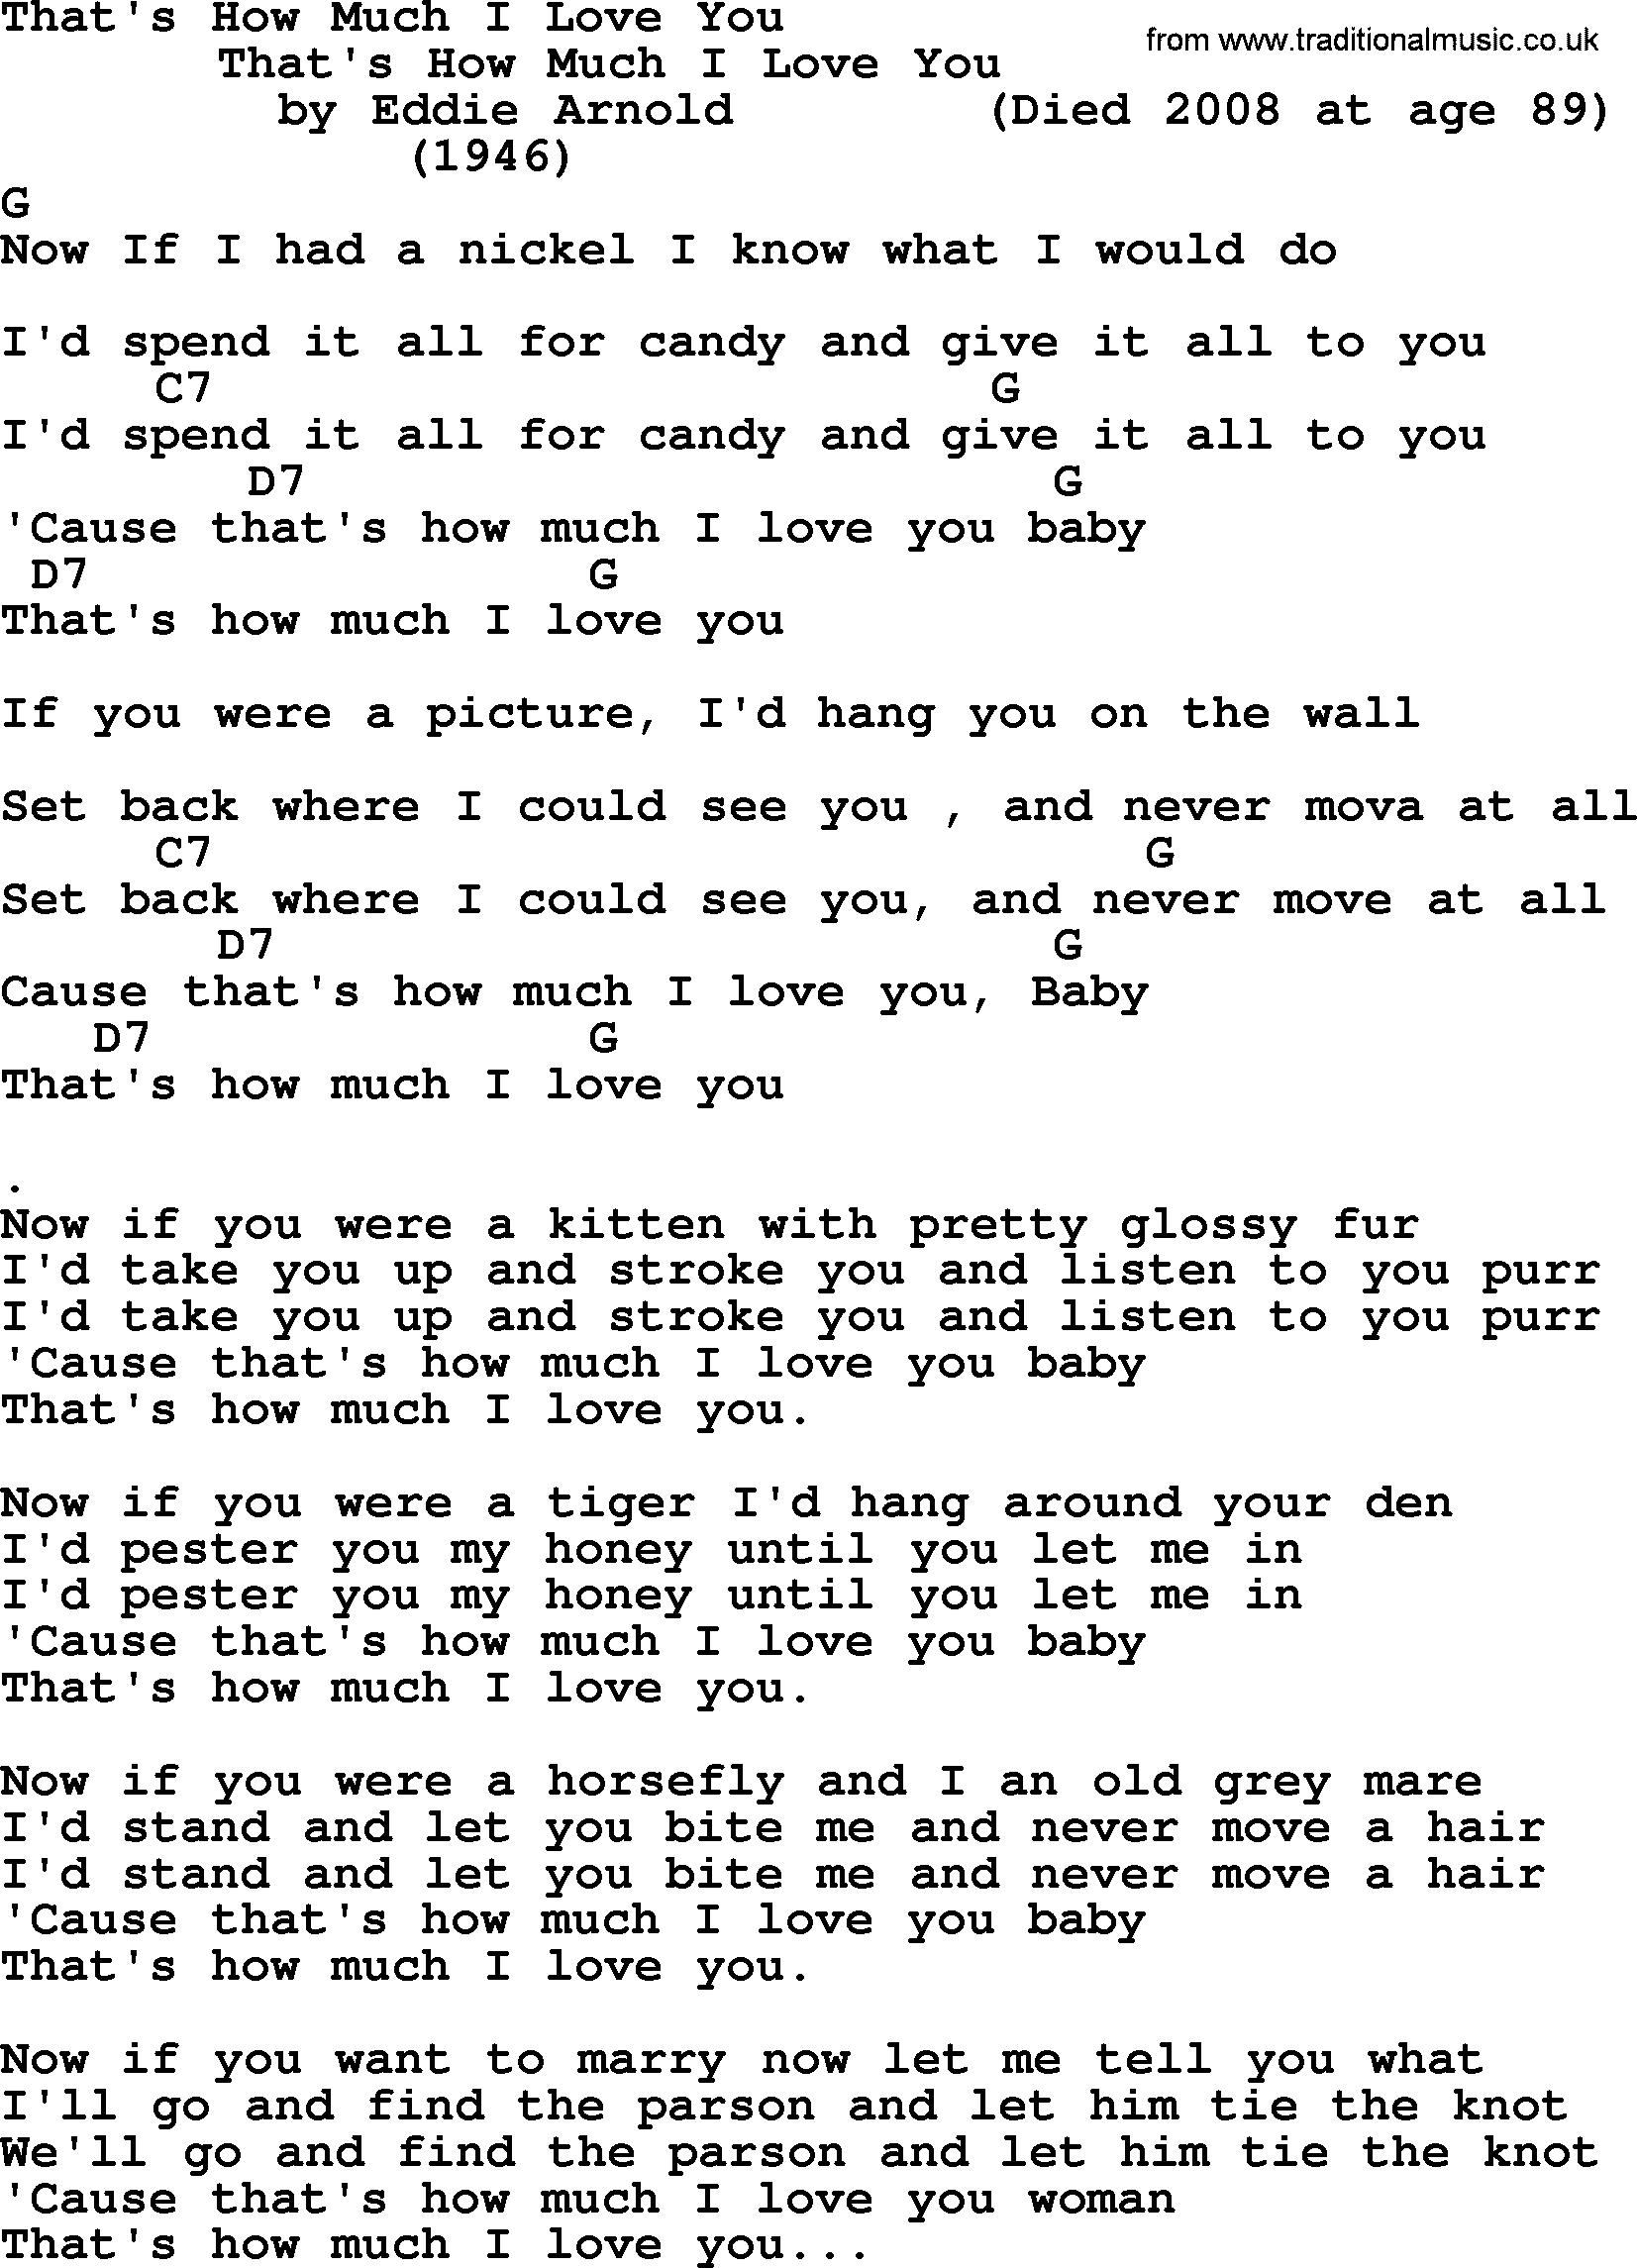 Bluegrass song: That's How Much I Love You, lyrics and chords